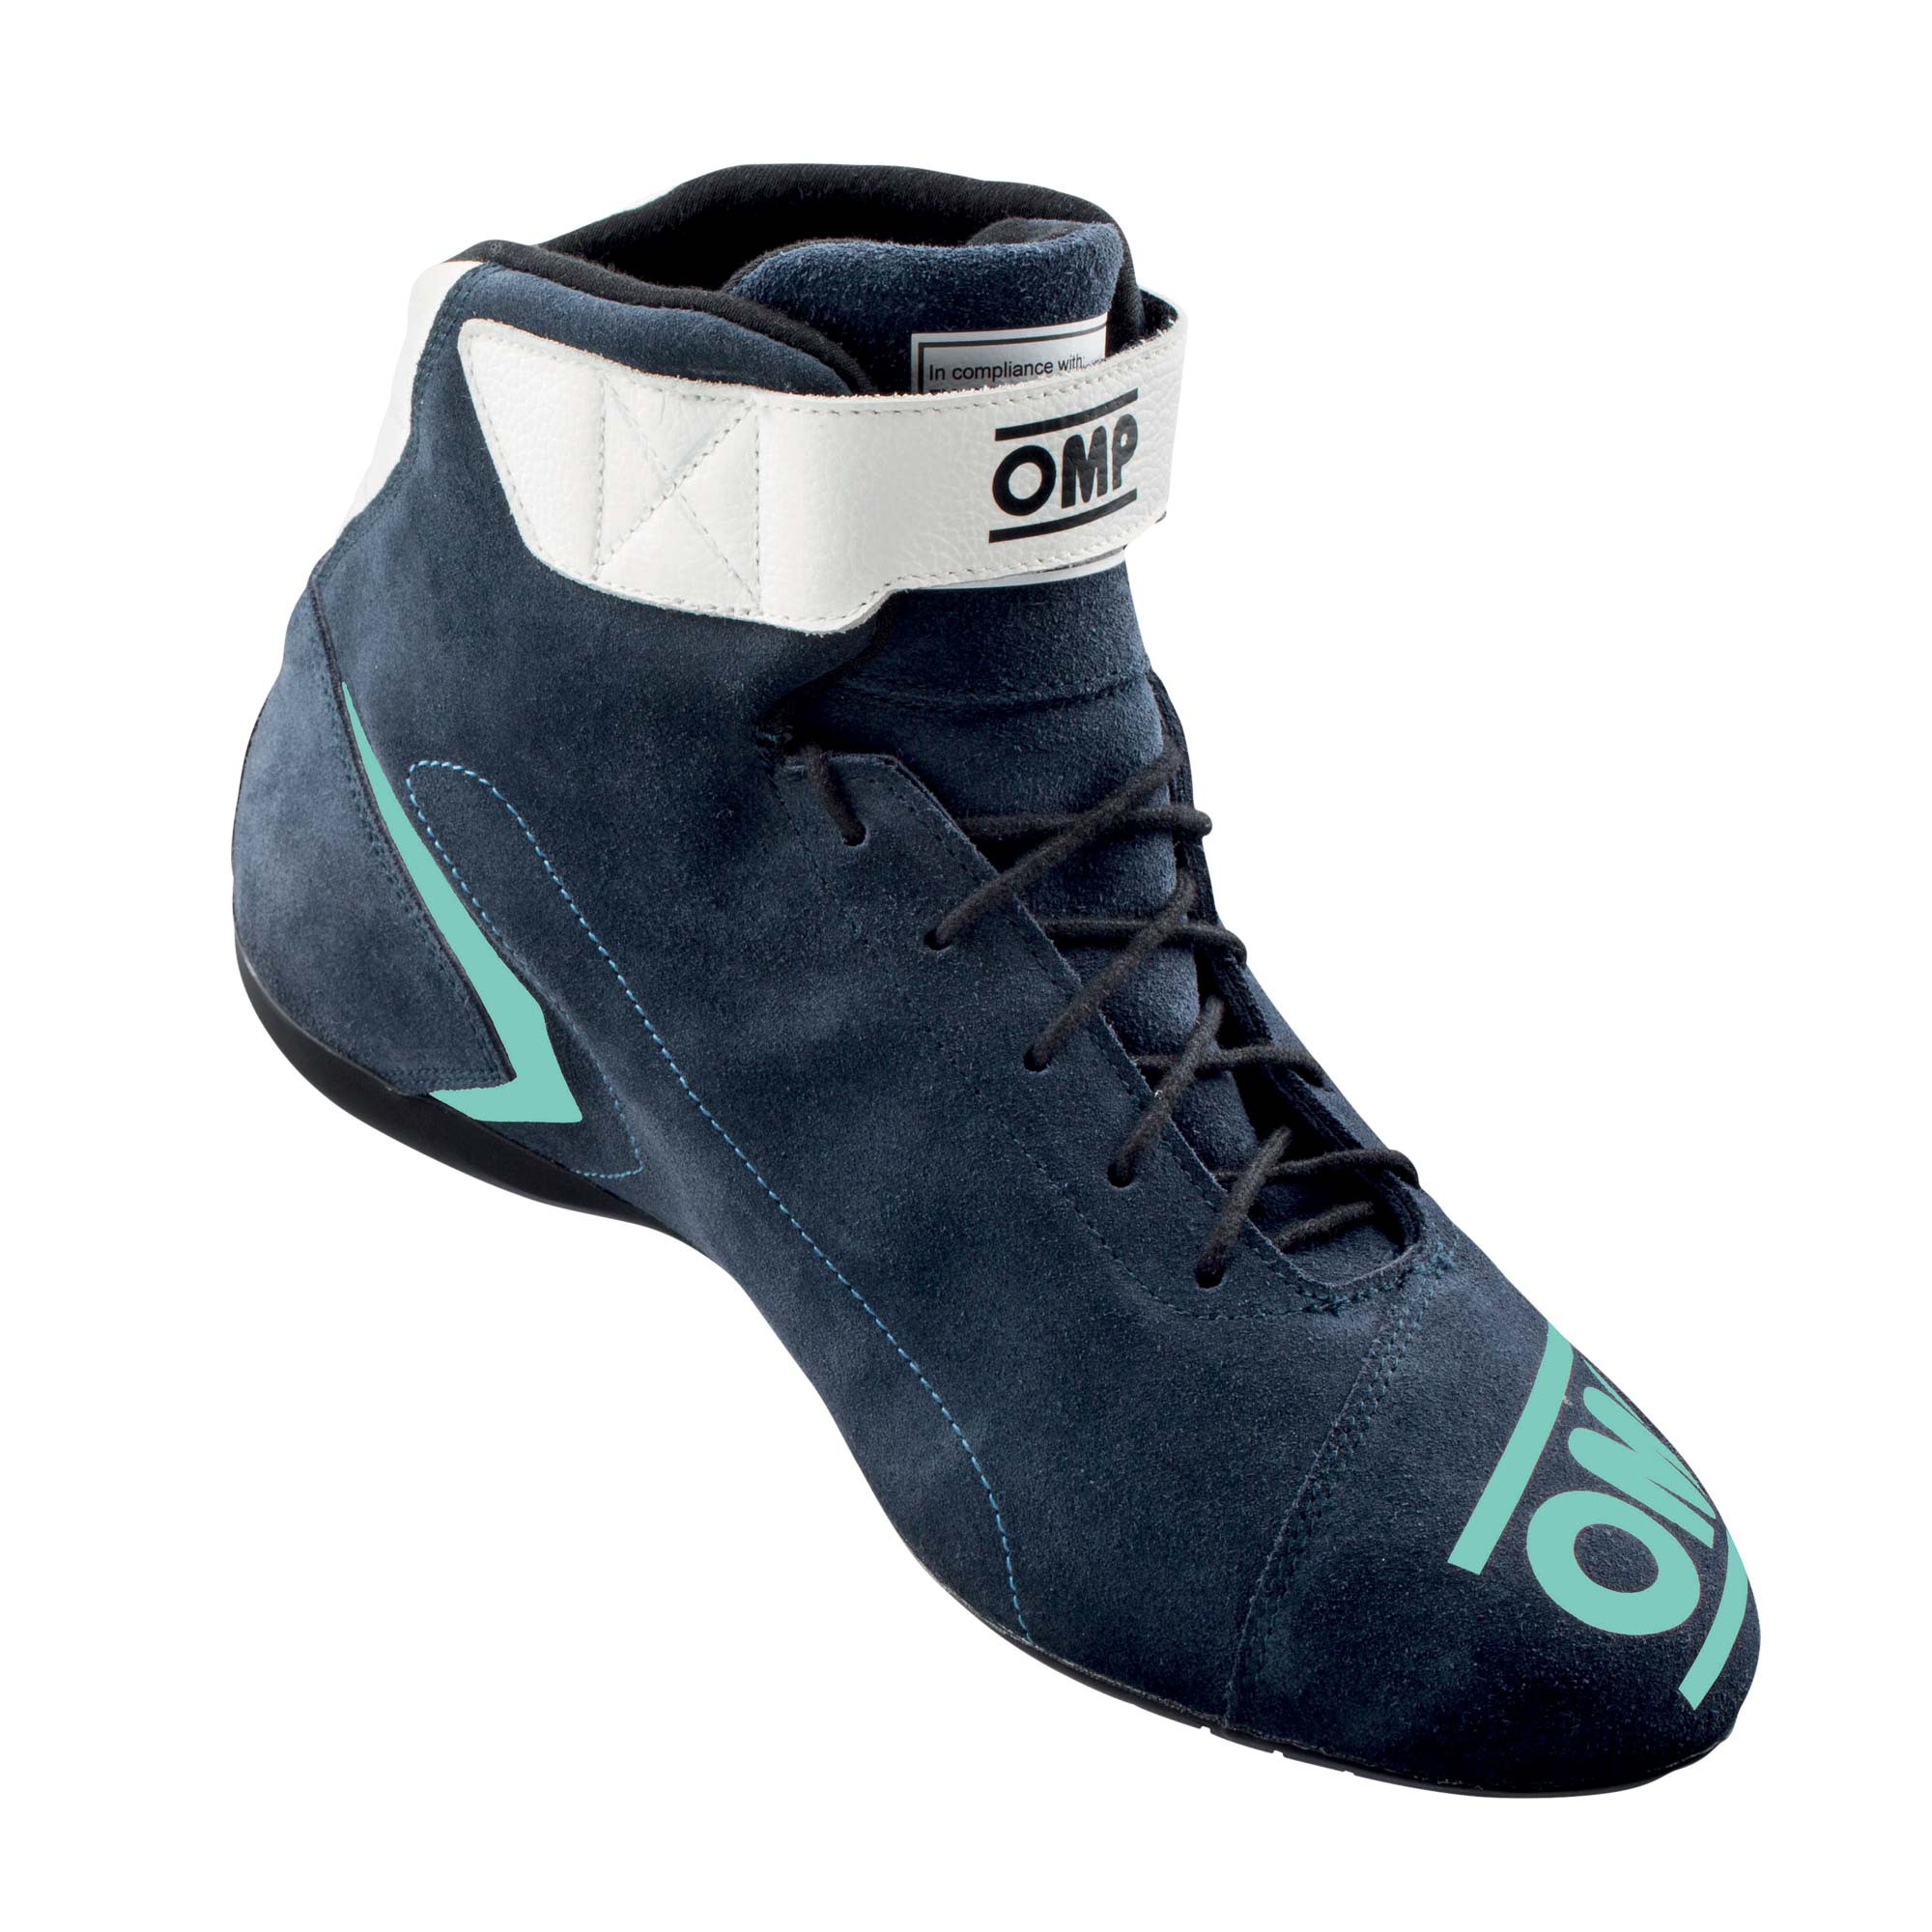 FIRST SHOES MY2021 - Racing shoes | OMP Racing